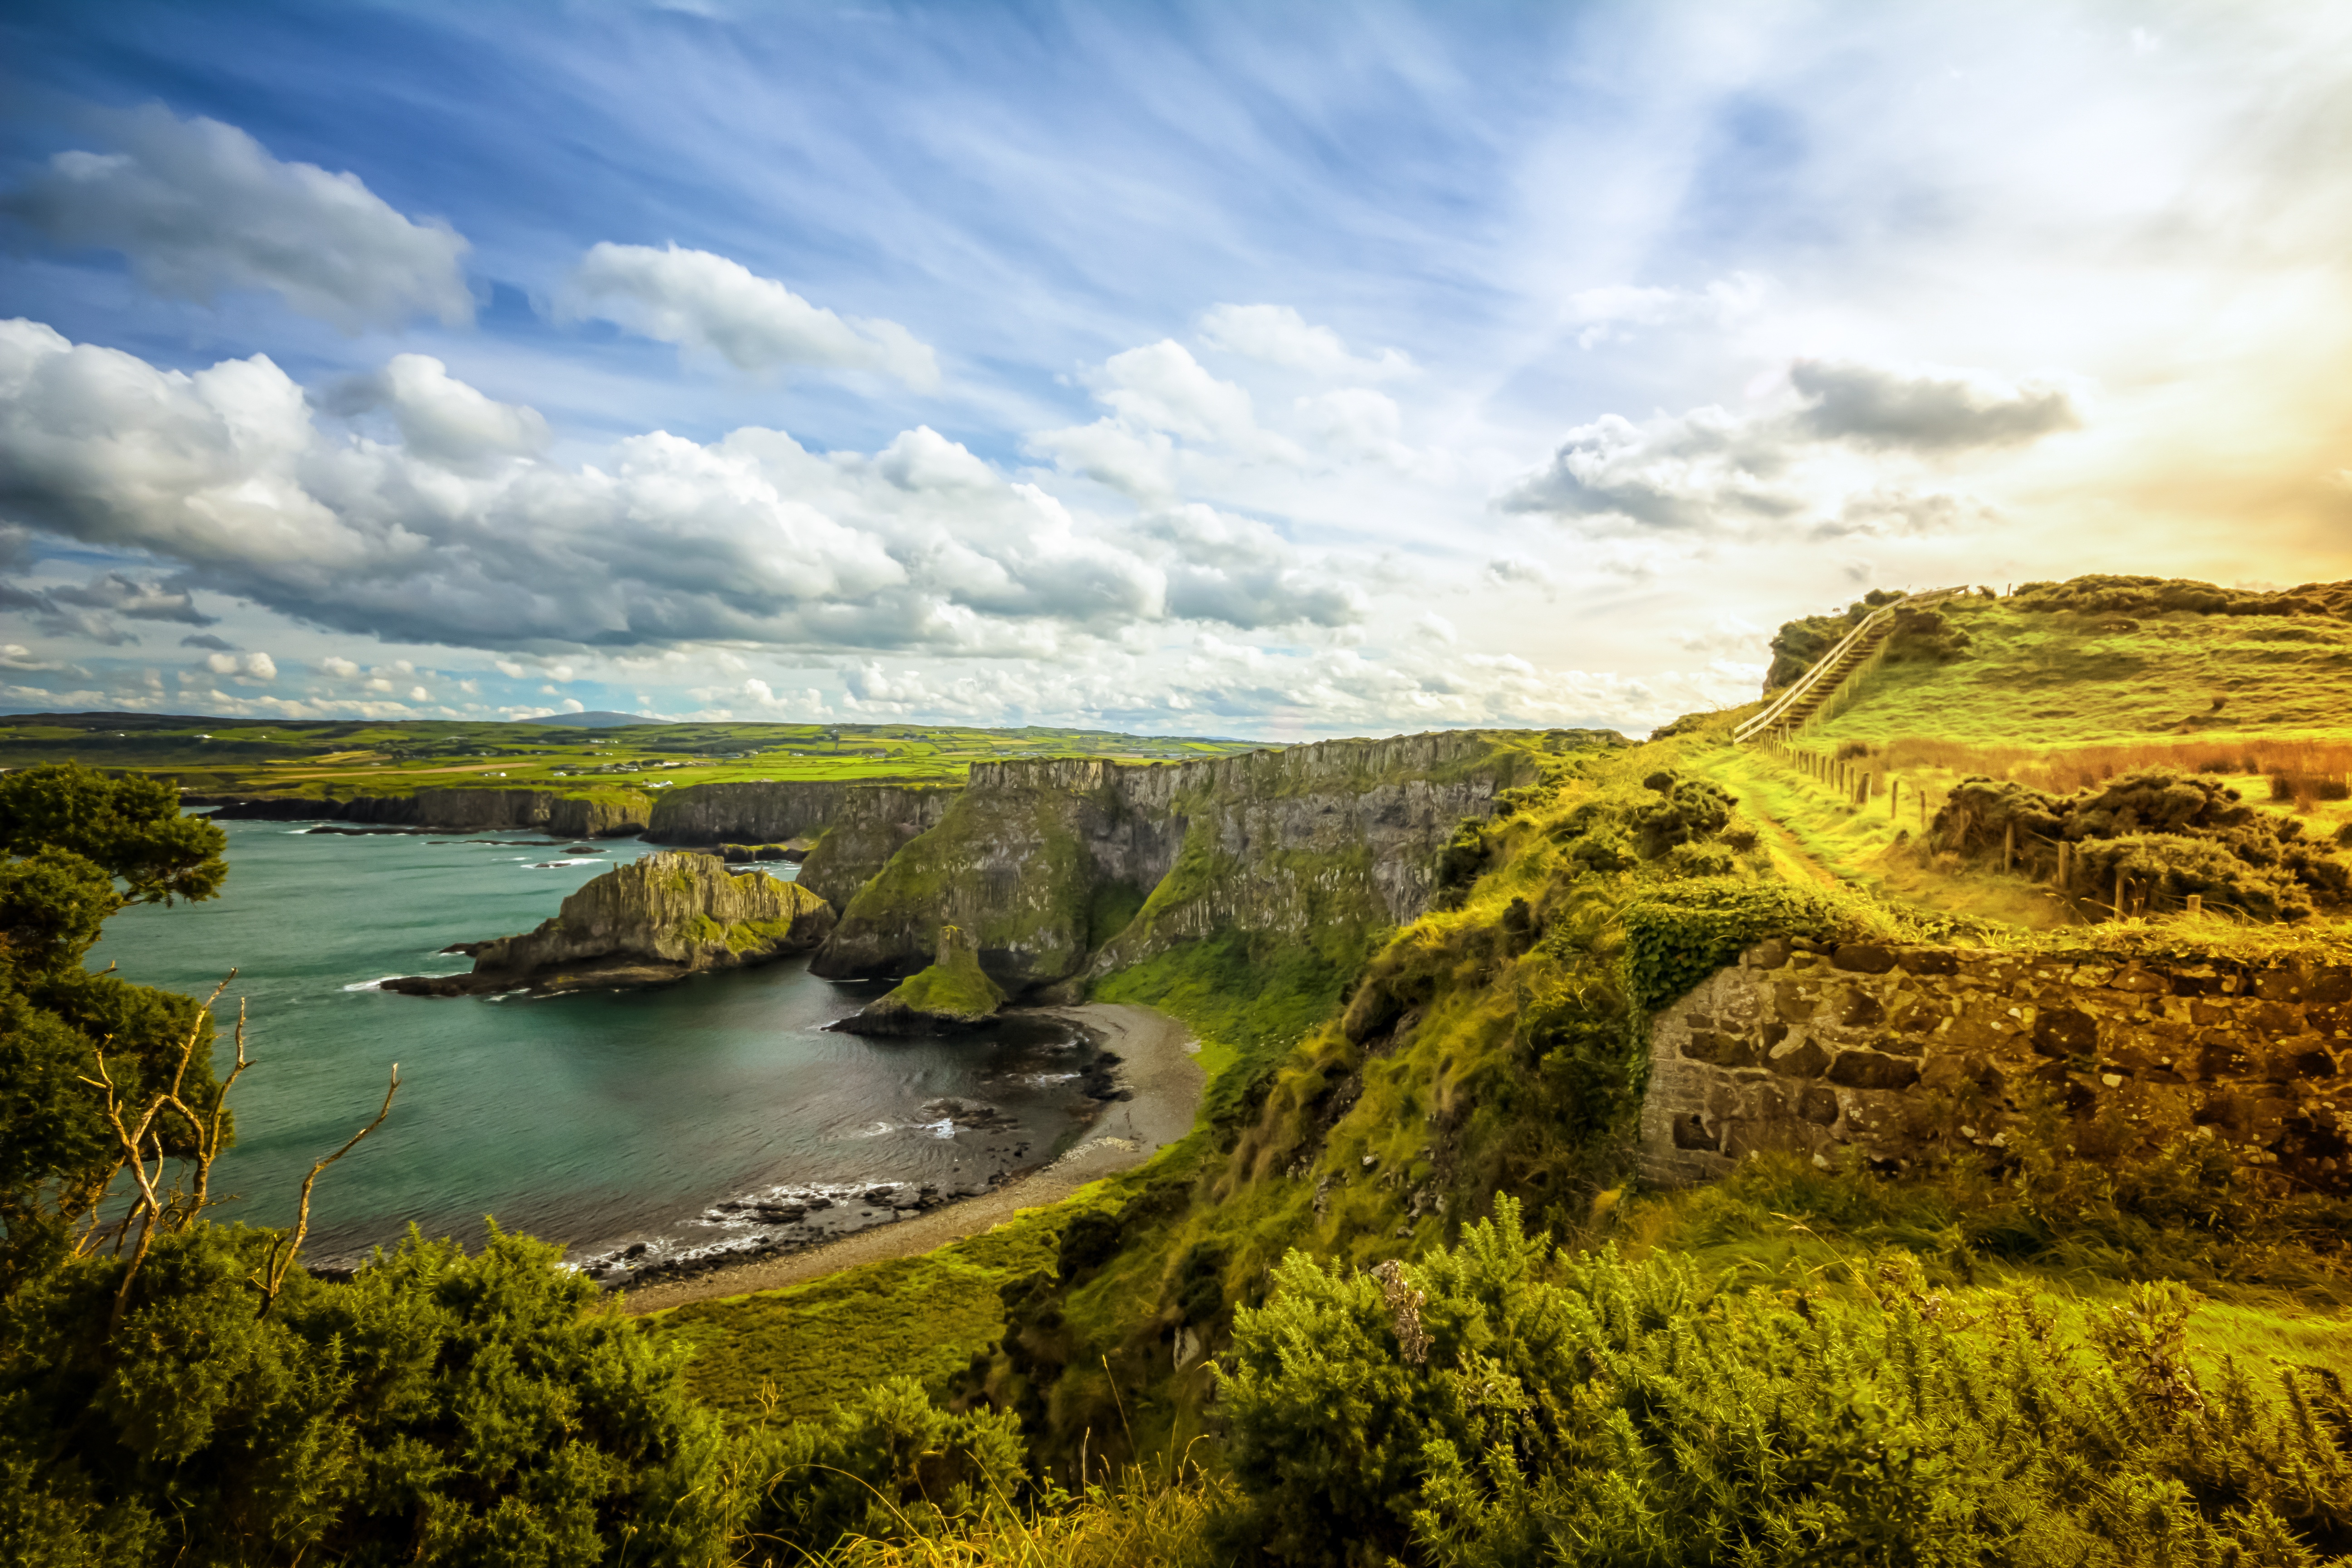 The iconic Cliffs of Fairhead in Northern Ireland